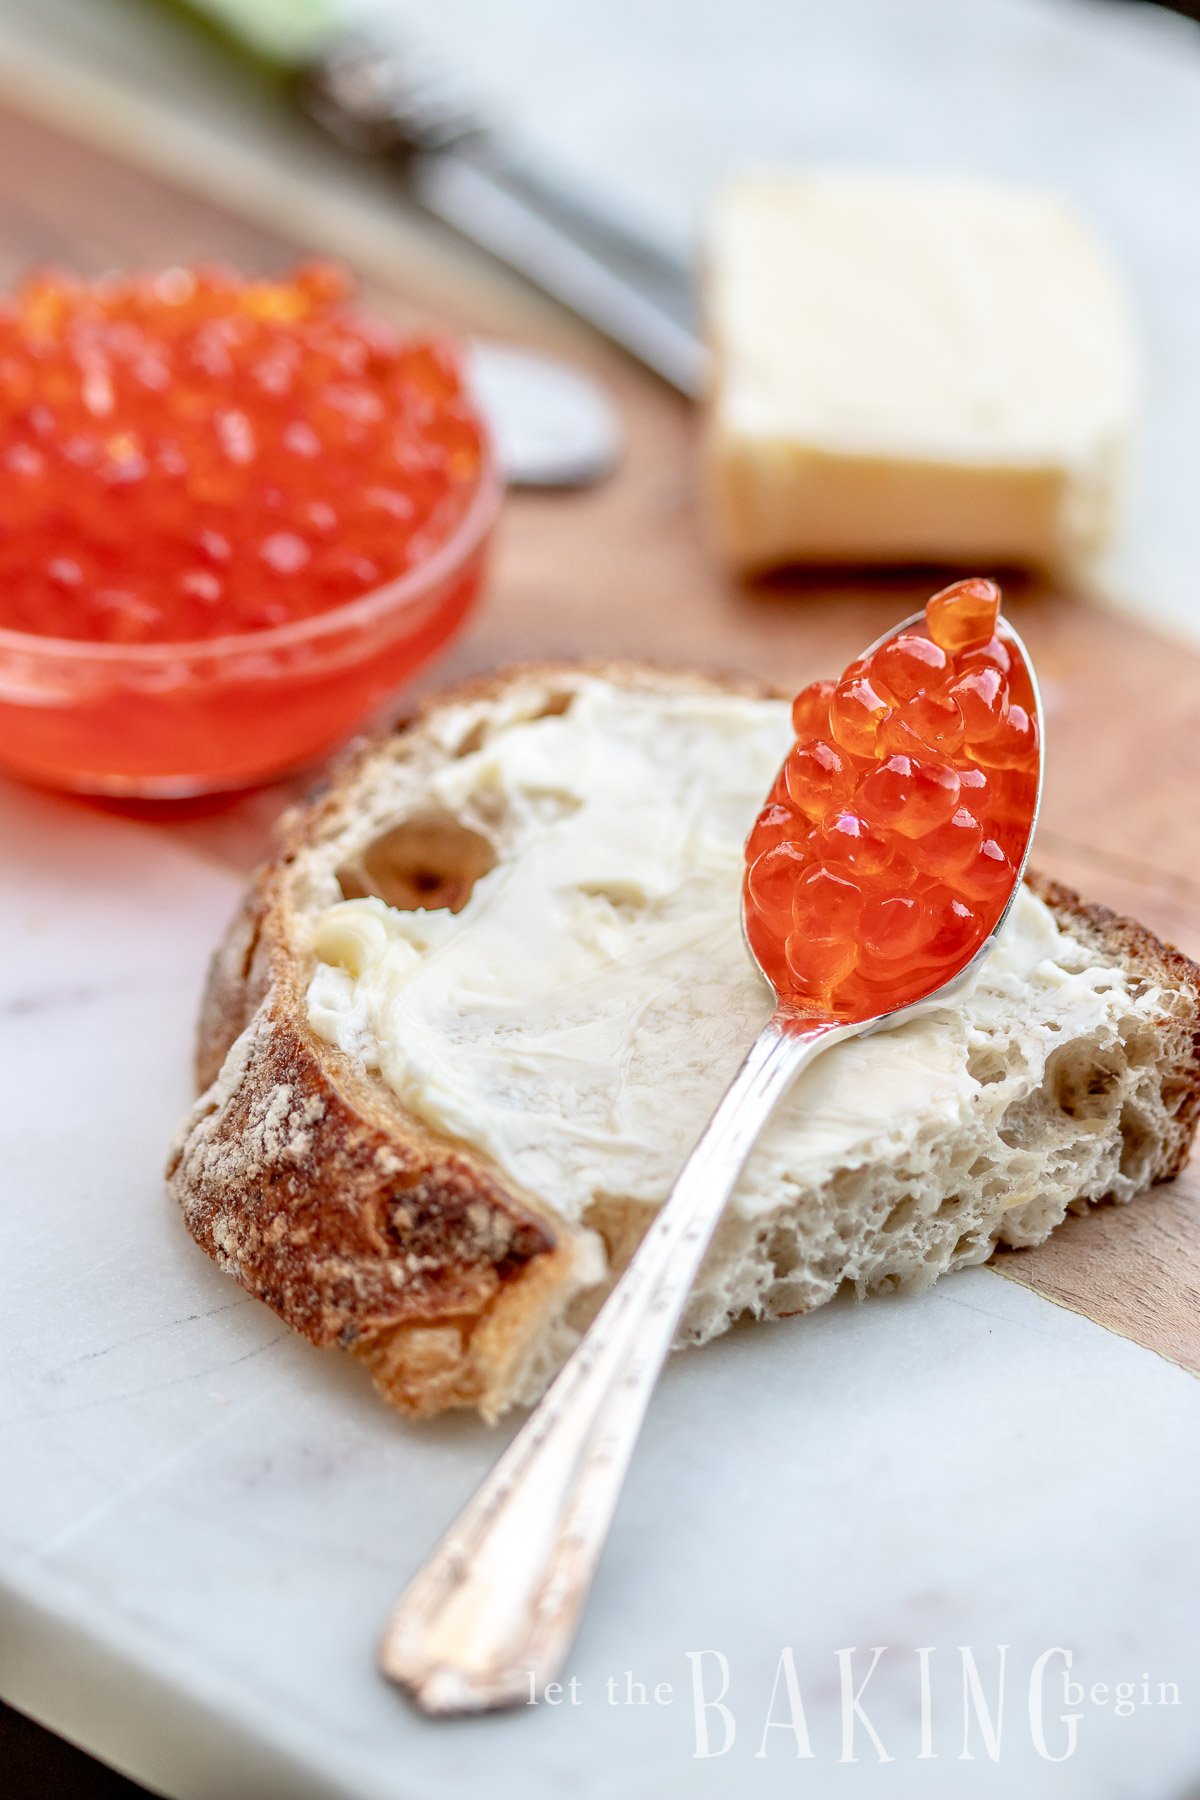 Buttered bread with a spoonful of homemade salmon caviar.